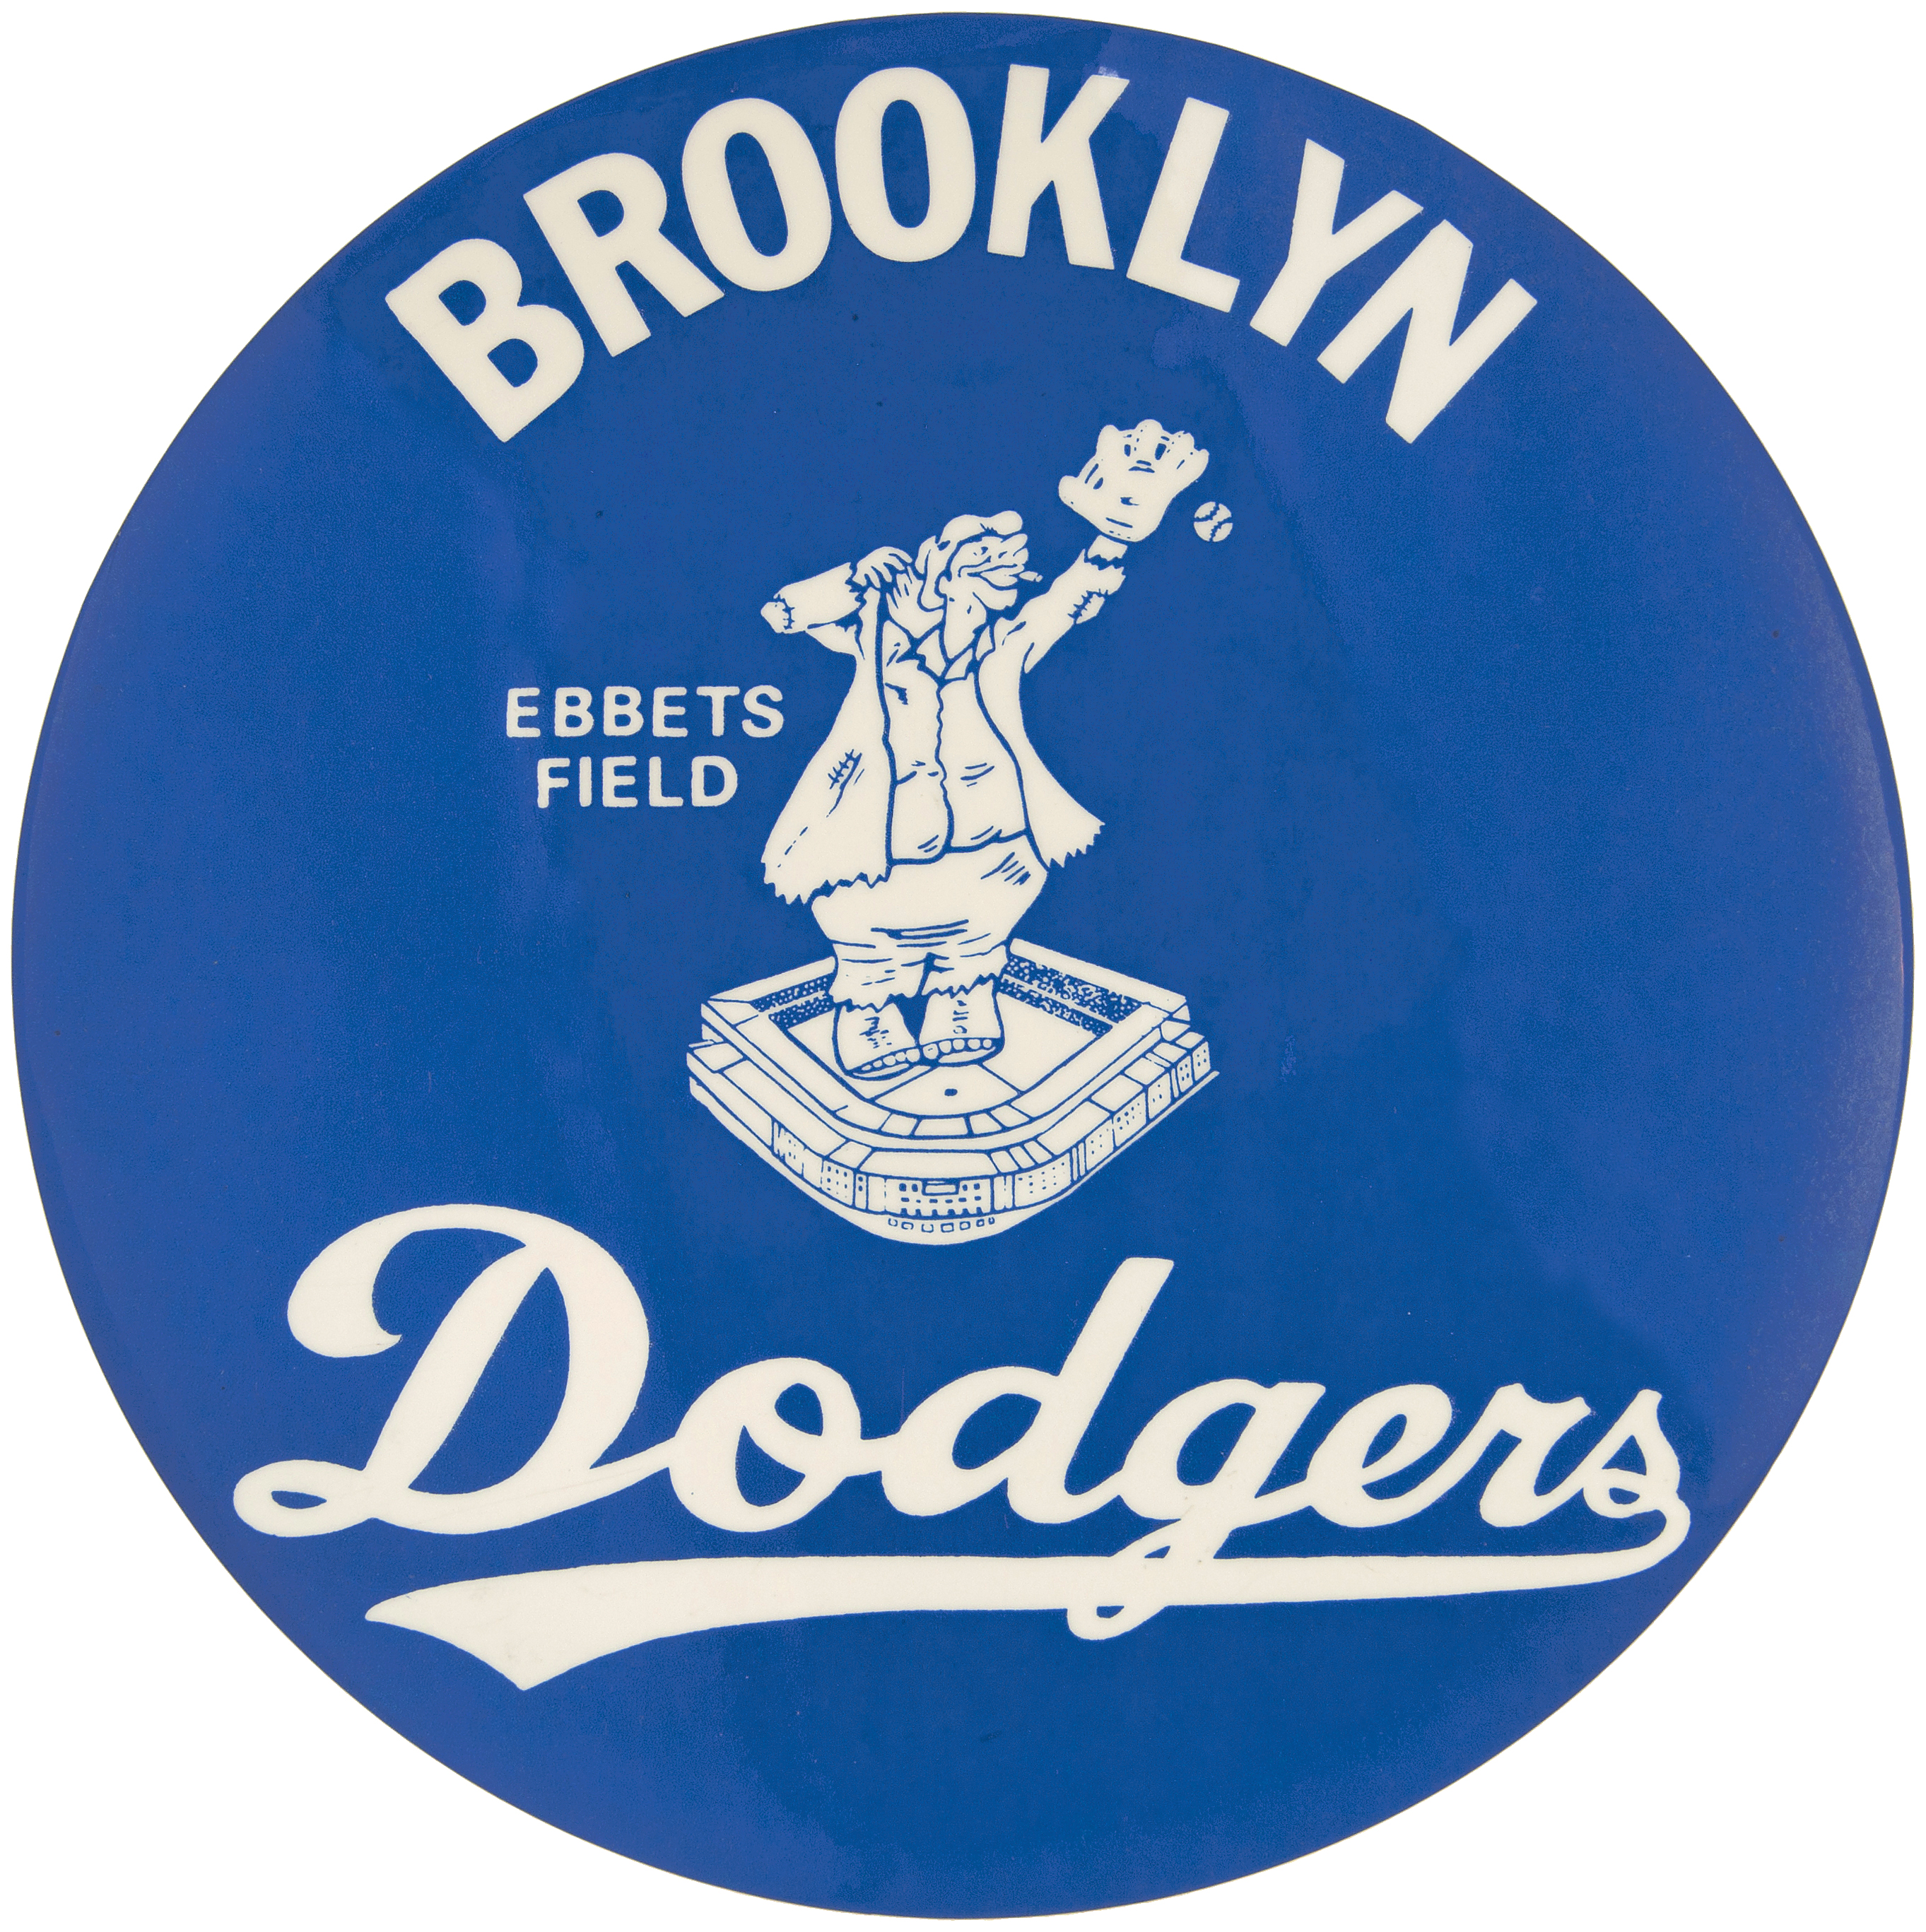 Hake's - OUTSTANDING BIG 6 BROOKLYN DODGERS BUTTON HIGHLY VALUED